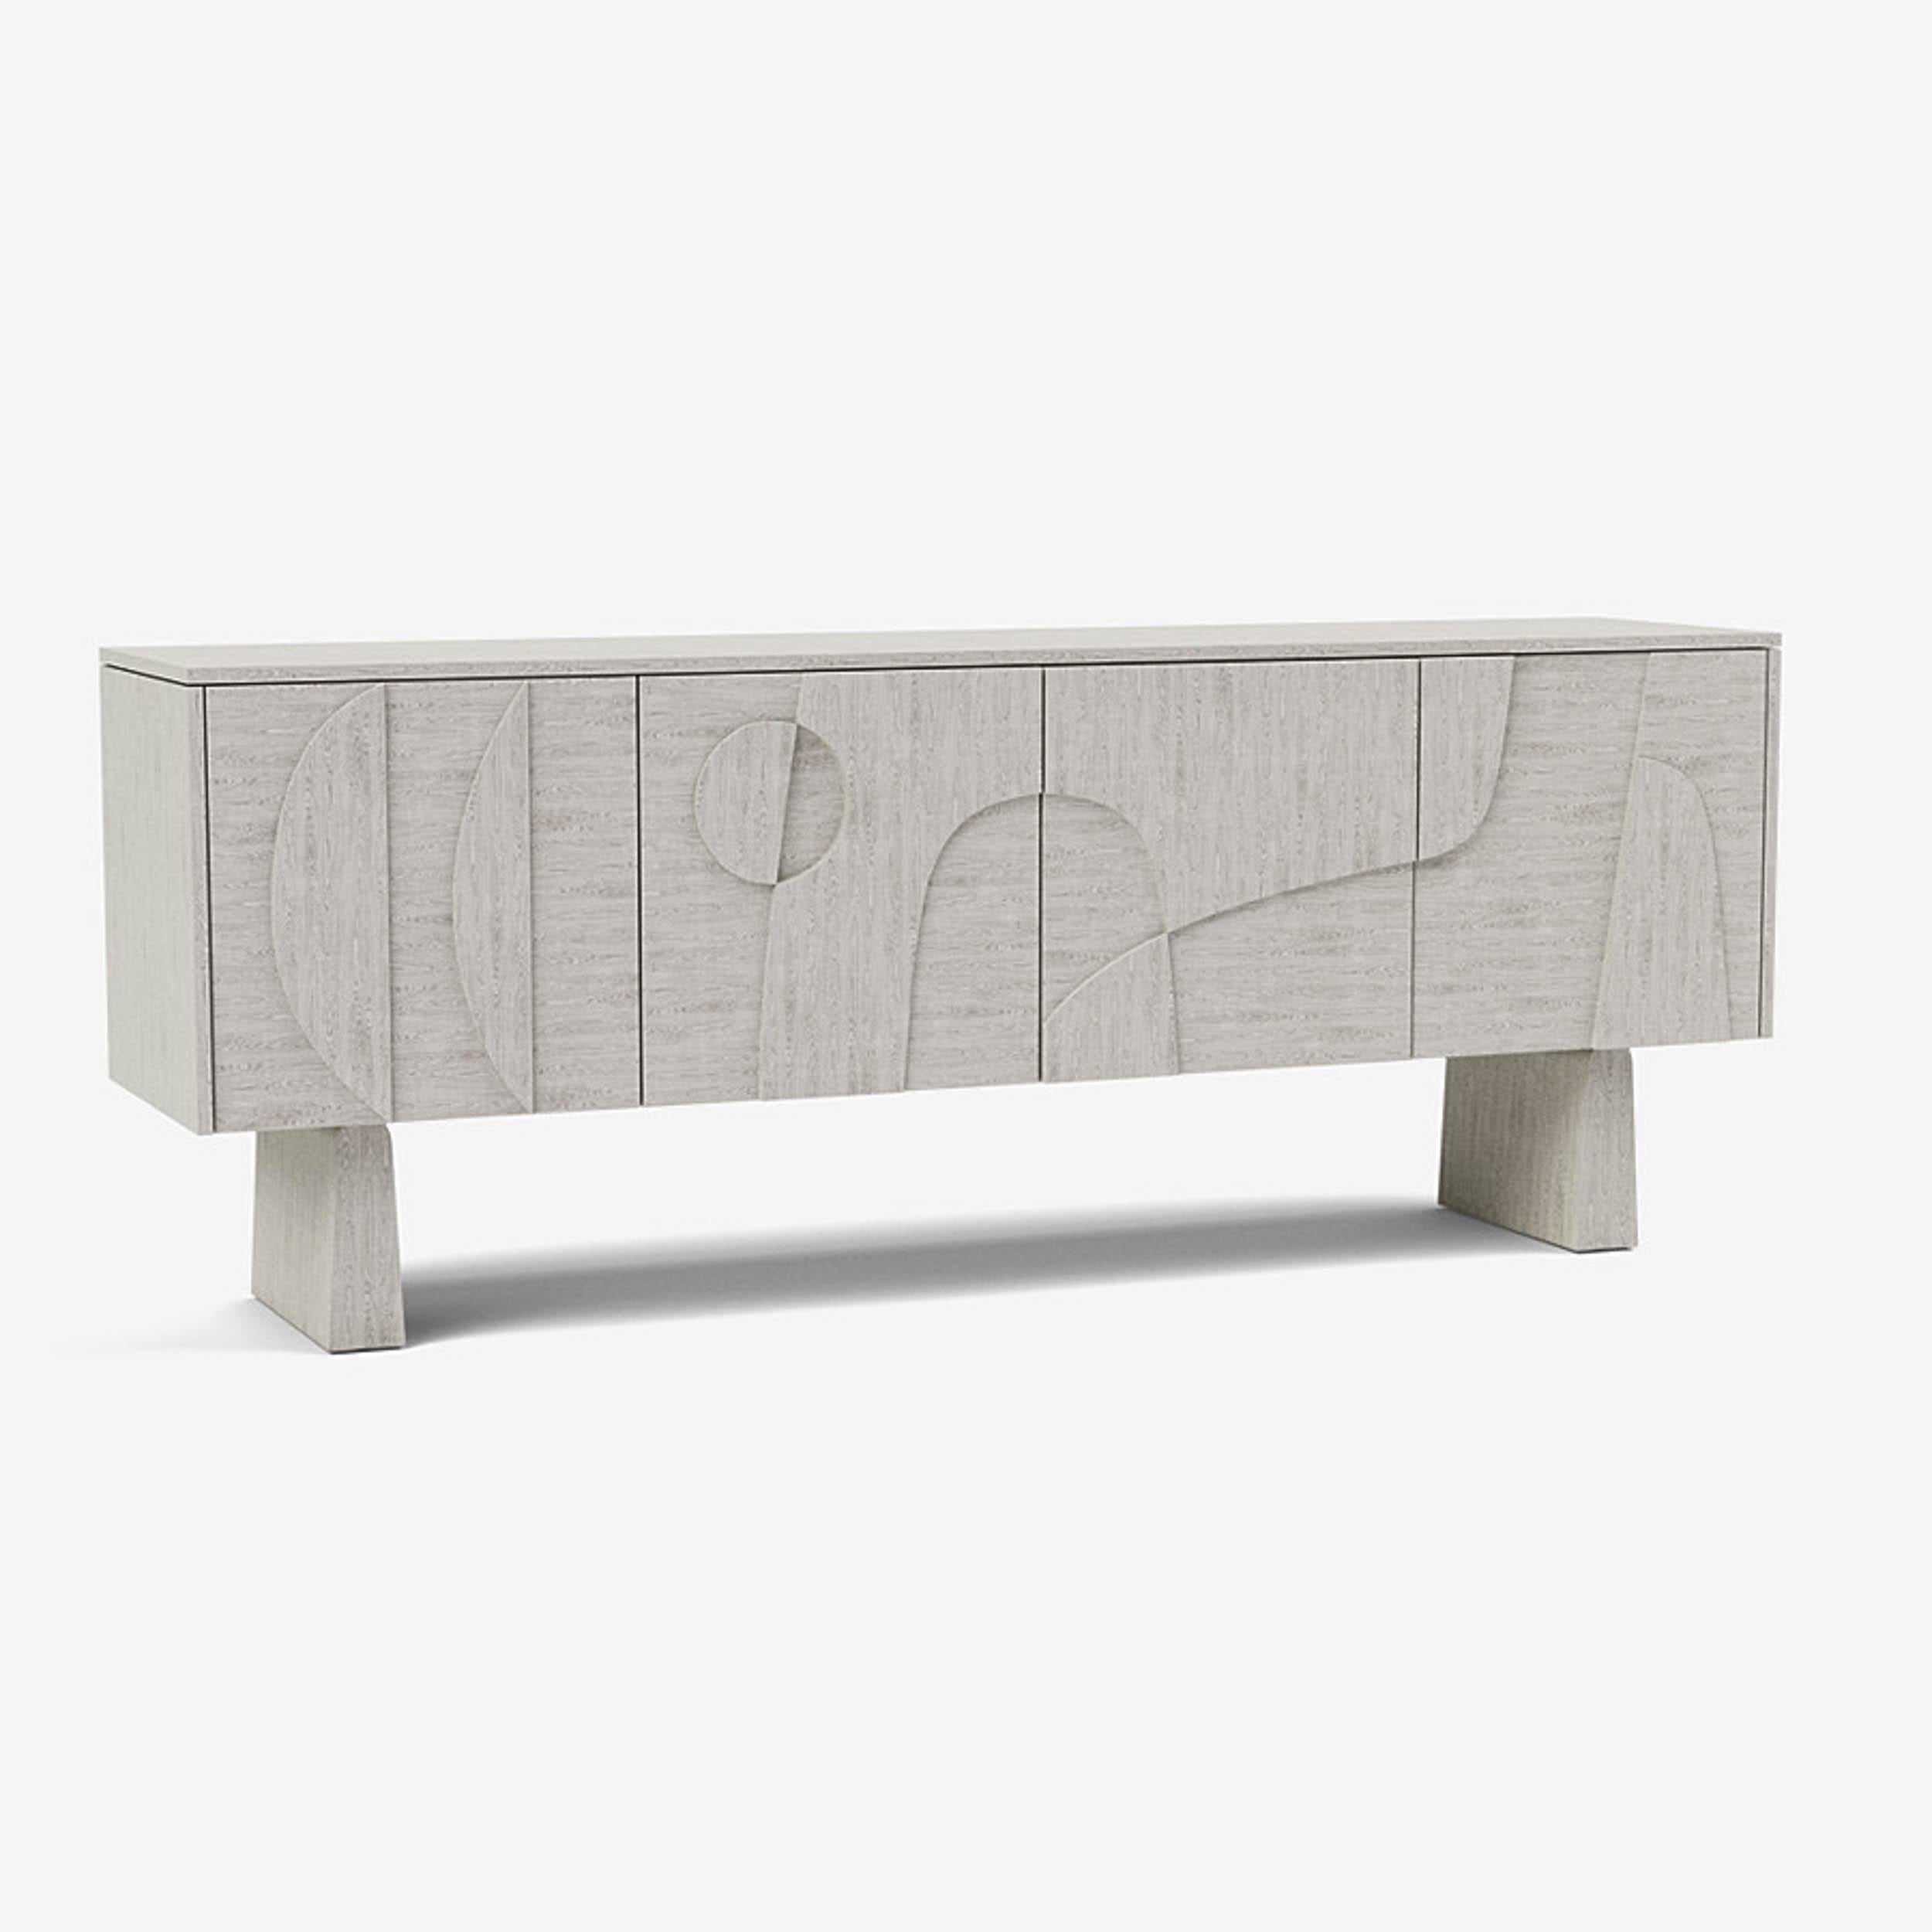 Contemporary 'Wynwood' 4 Sideboard by Man of Parts, Black Oak, Short Legs For Sale 6